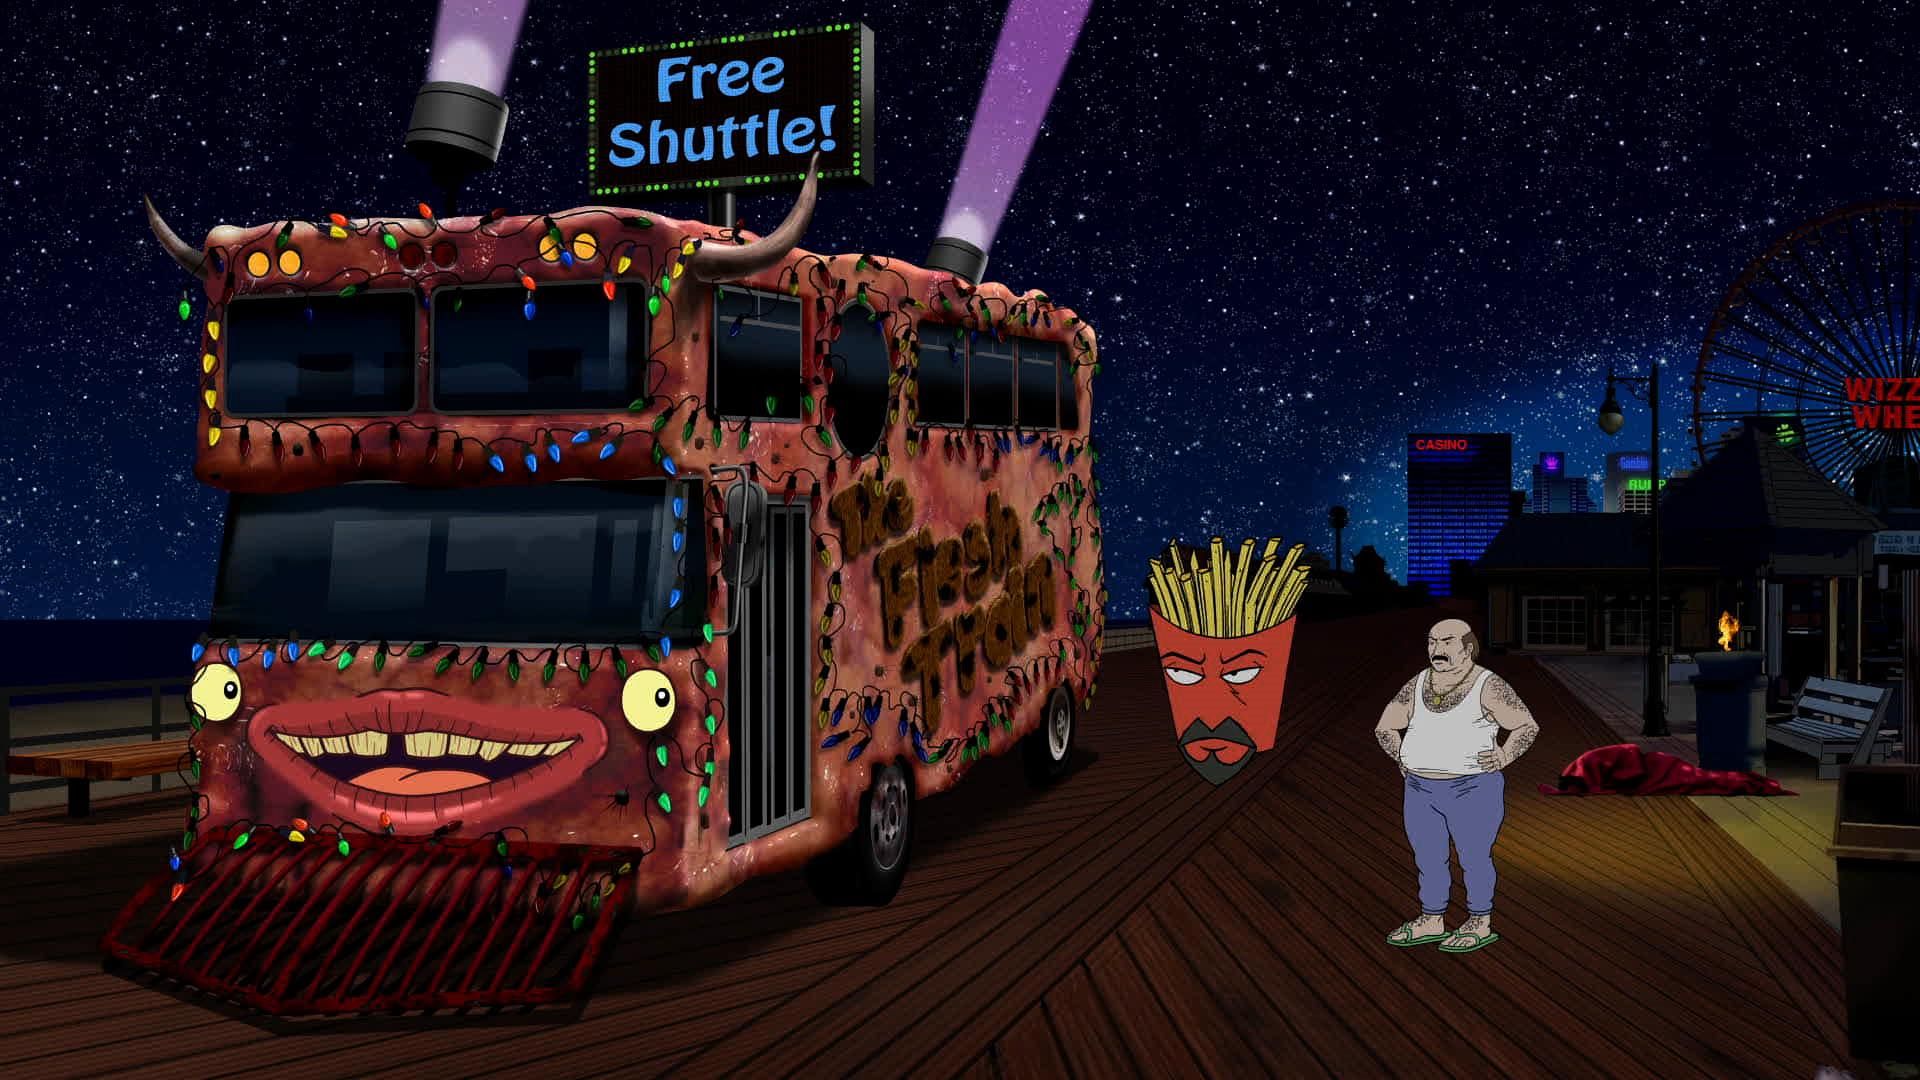 Bus Force Xxx - The Hairy Bus - S11 EP3 - Aqua Teen Hunger Force